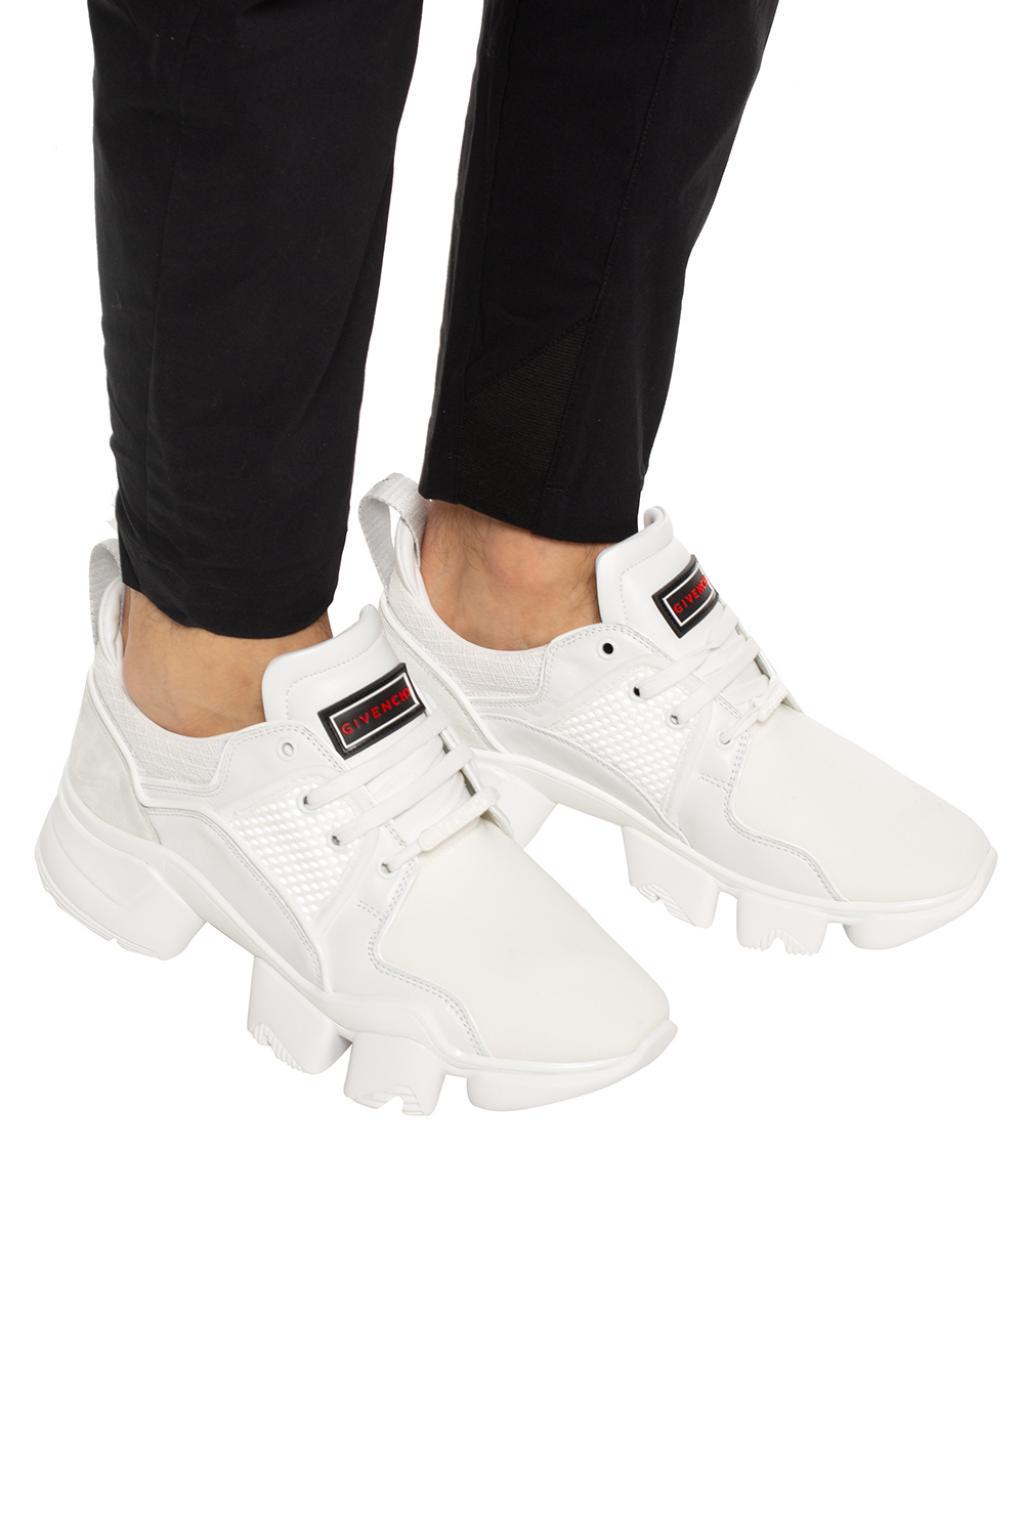 Givenchy Leather 'jaw' Branded Sneakers in White for Men - Lyst